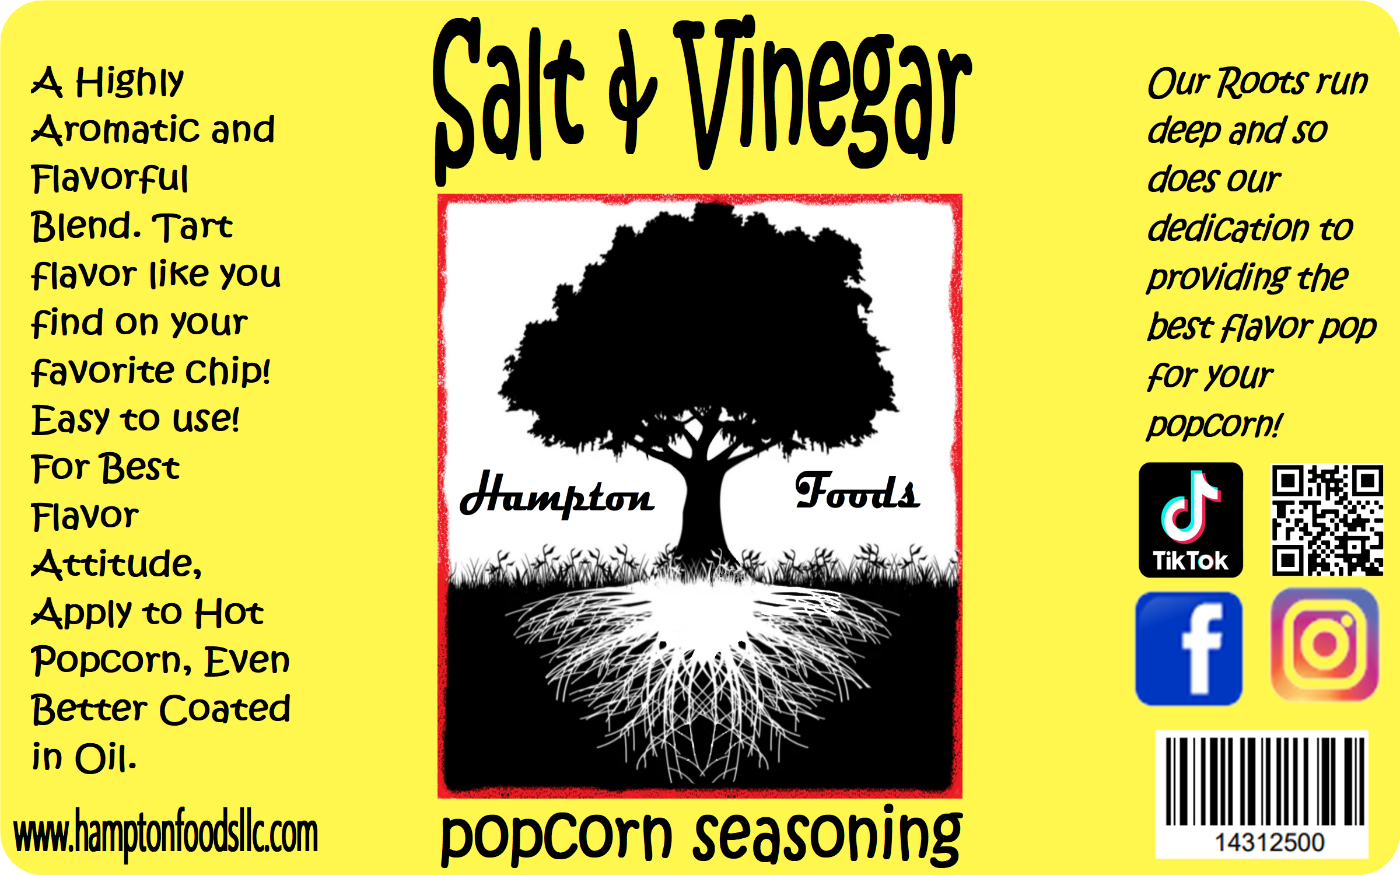 Salt & Vinegar Popcorn Seasoning, A Highly Aromatic and Flavorful Blend. Tart flavor like you find on your favorite chip! Easy to use! For Best Flavor Attitude, Apply to Hot Popcorn, Even Better Coated in Oil.